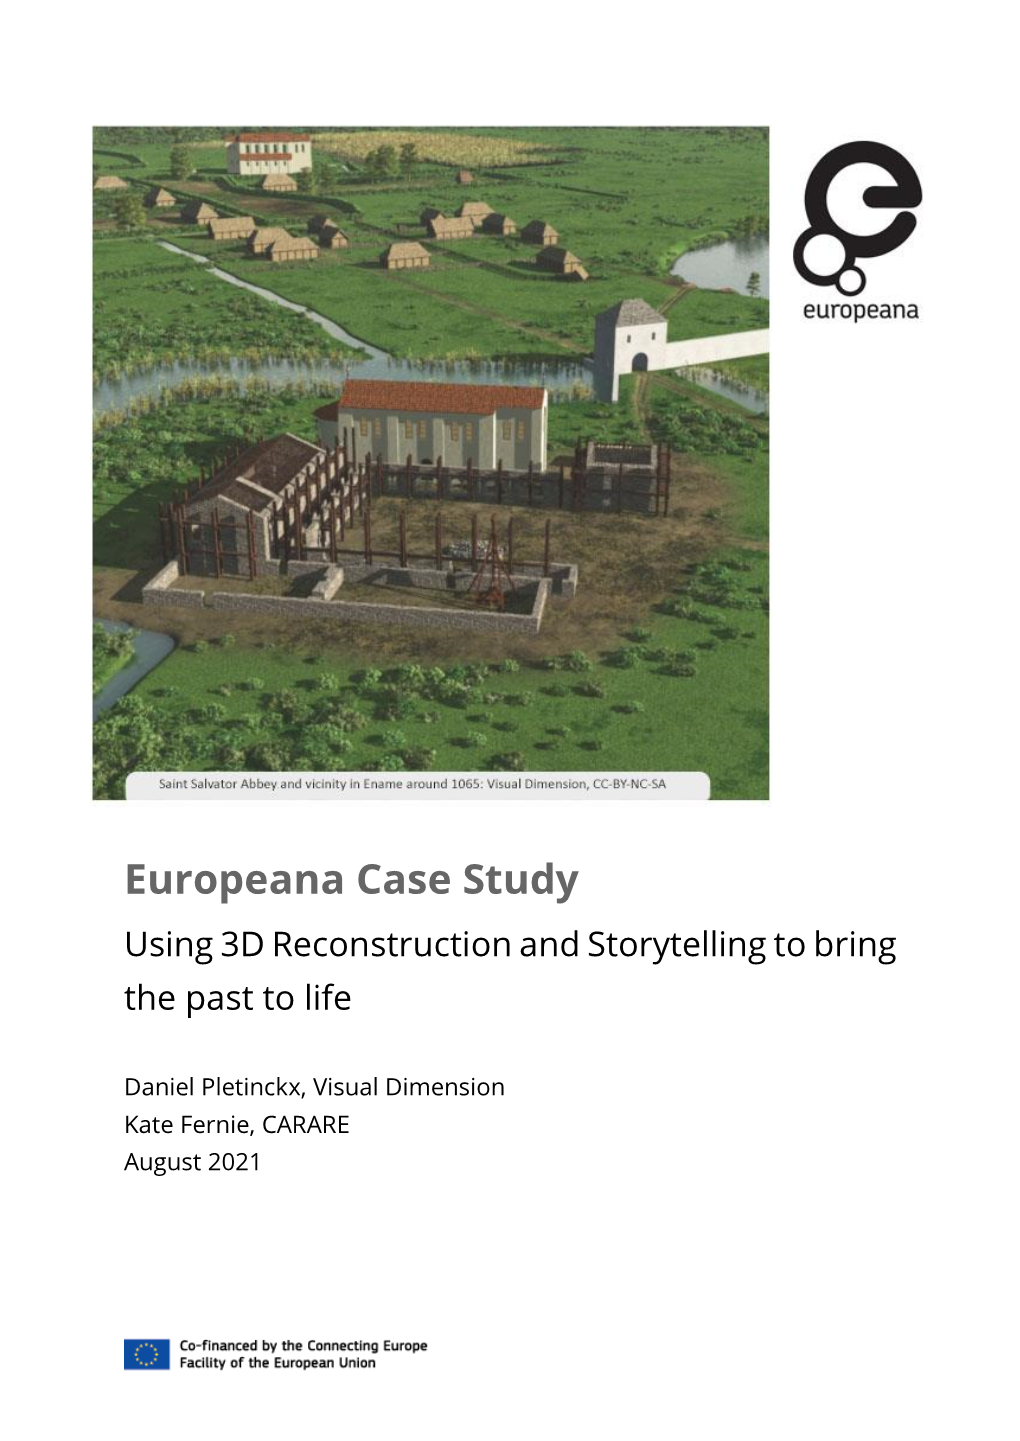 Europeana Case Study Using 3D Reconstruction and Storytelling to Bring the Past to Life